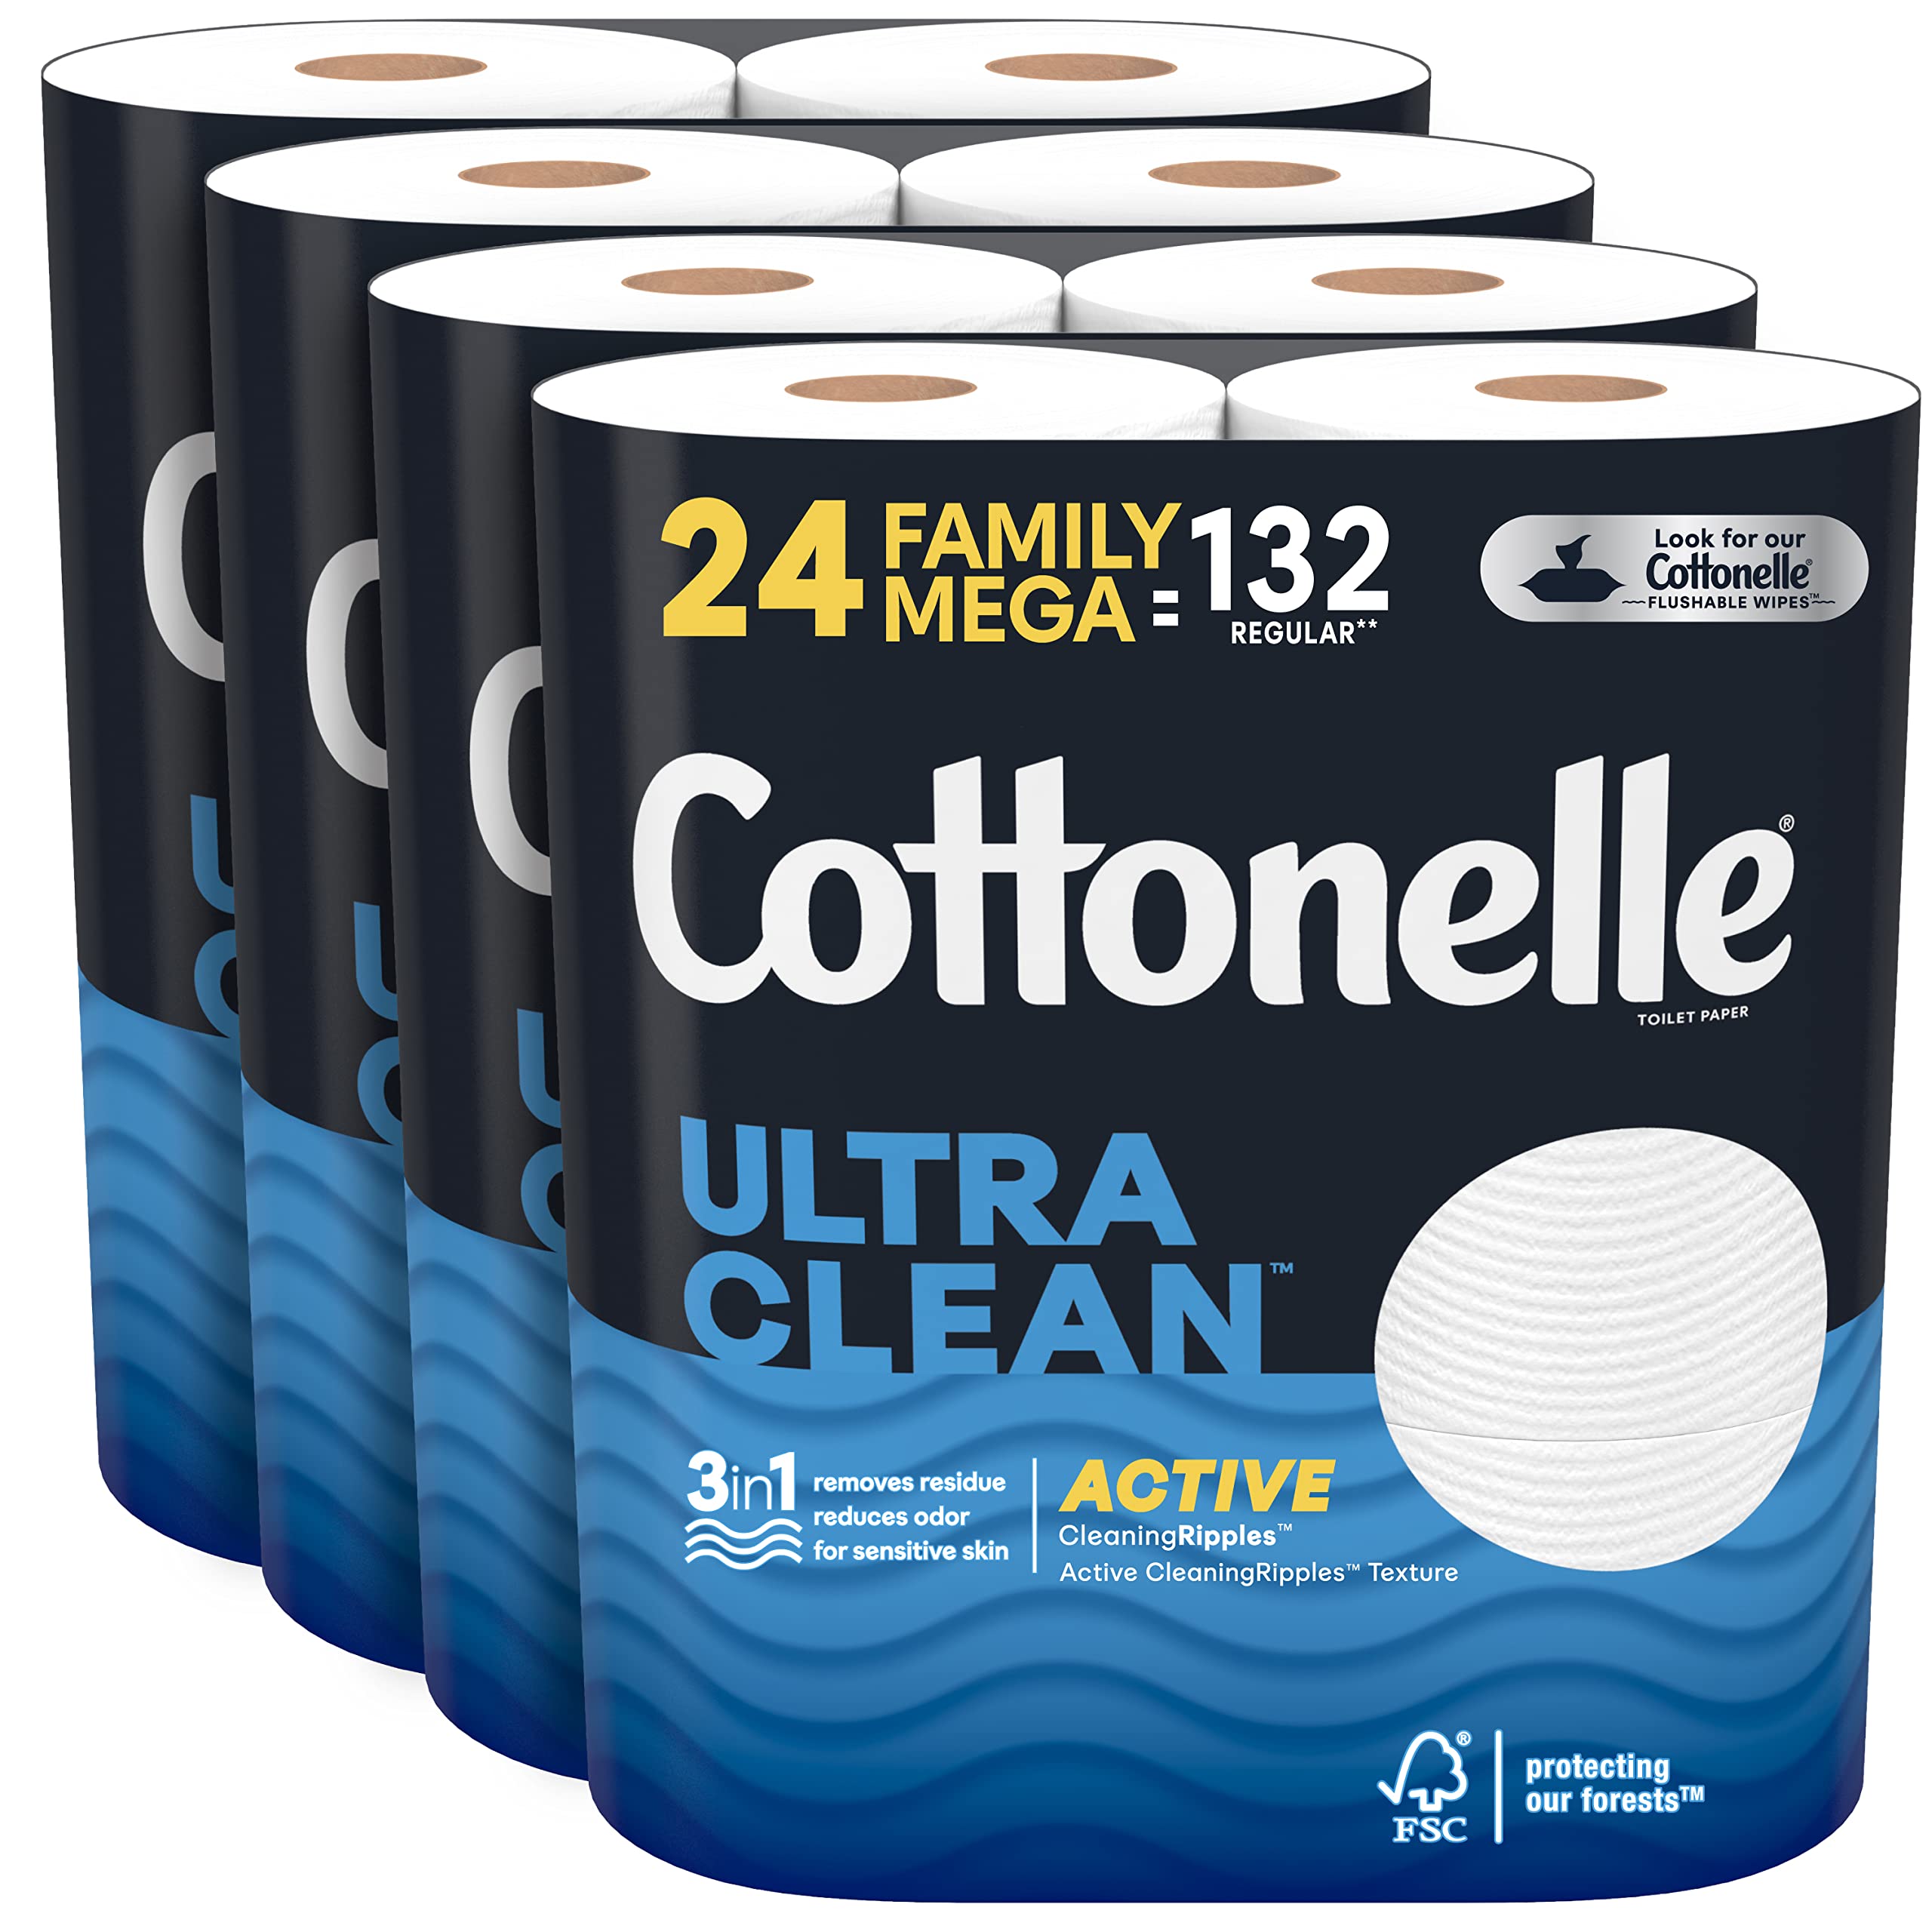 Cottonelle Ultra Clean Toilet Paper with Active CleaningRipples, 1-Ply, 24 Family Mega Rolls (4 Packs of 6) (24 Family Mega Rolls = 132 Regular Rolls), 388 Sheets per Roll, Packaging May Vary